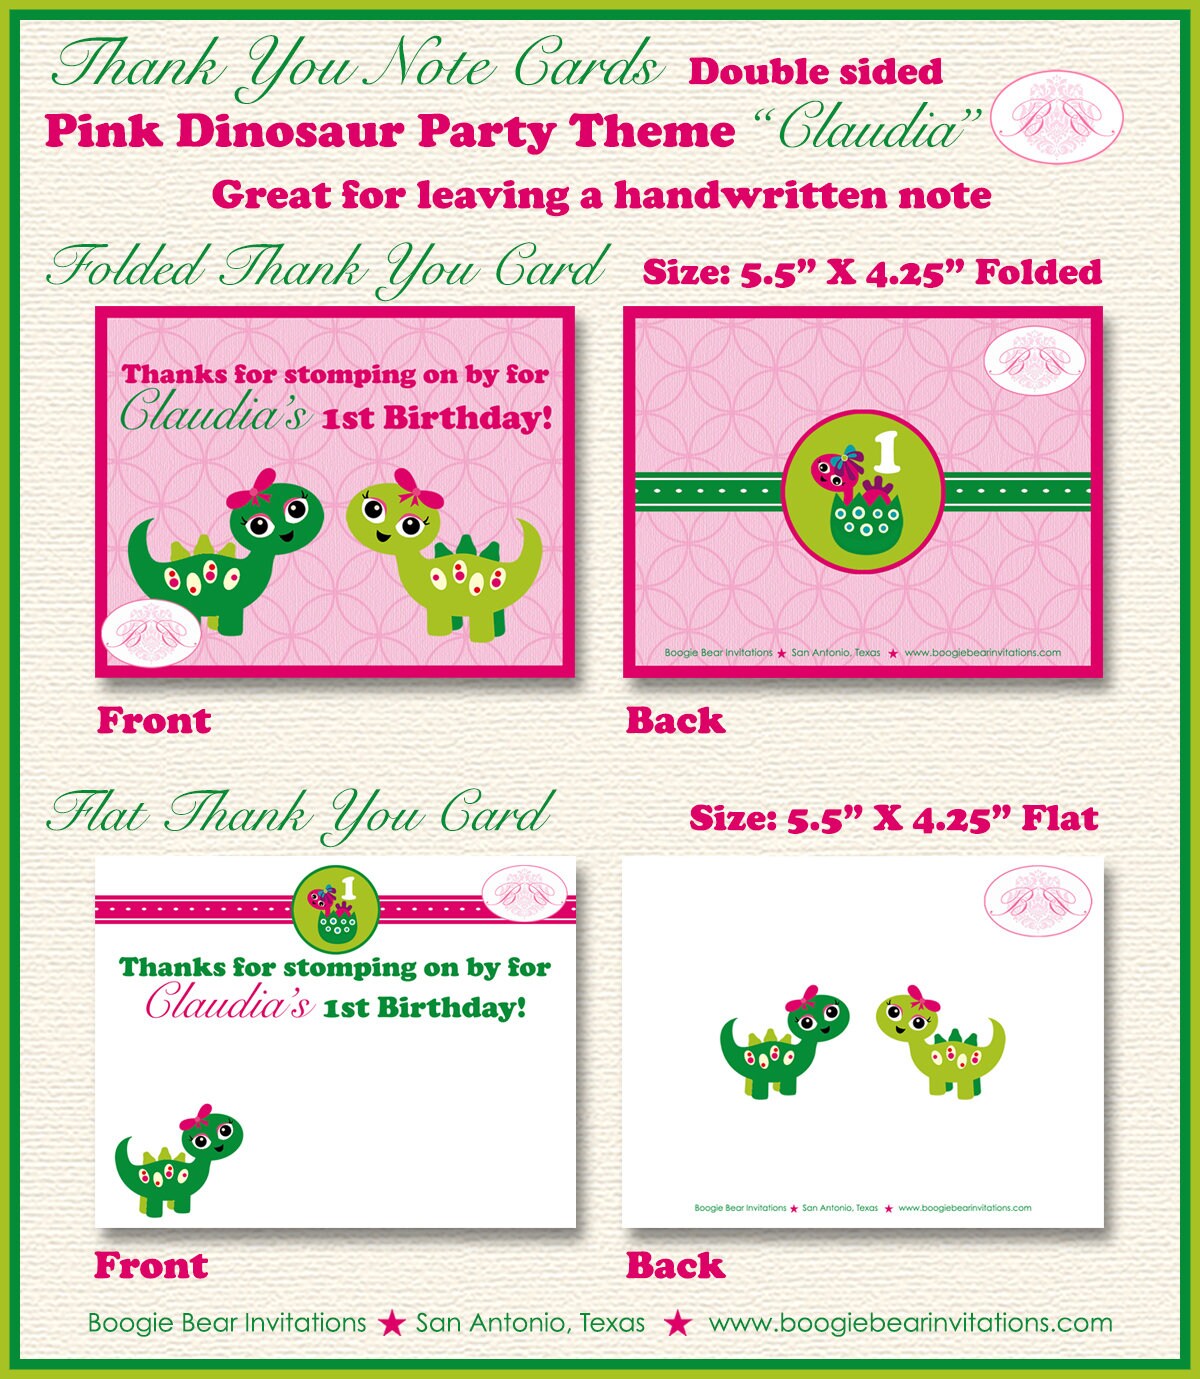 Pink Dinosaur Birthday Party Thank You Card Note Girl Lime Green Little Prehistoric Jurassic Boogie Bear Invitations Claudia Theme Printed